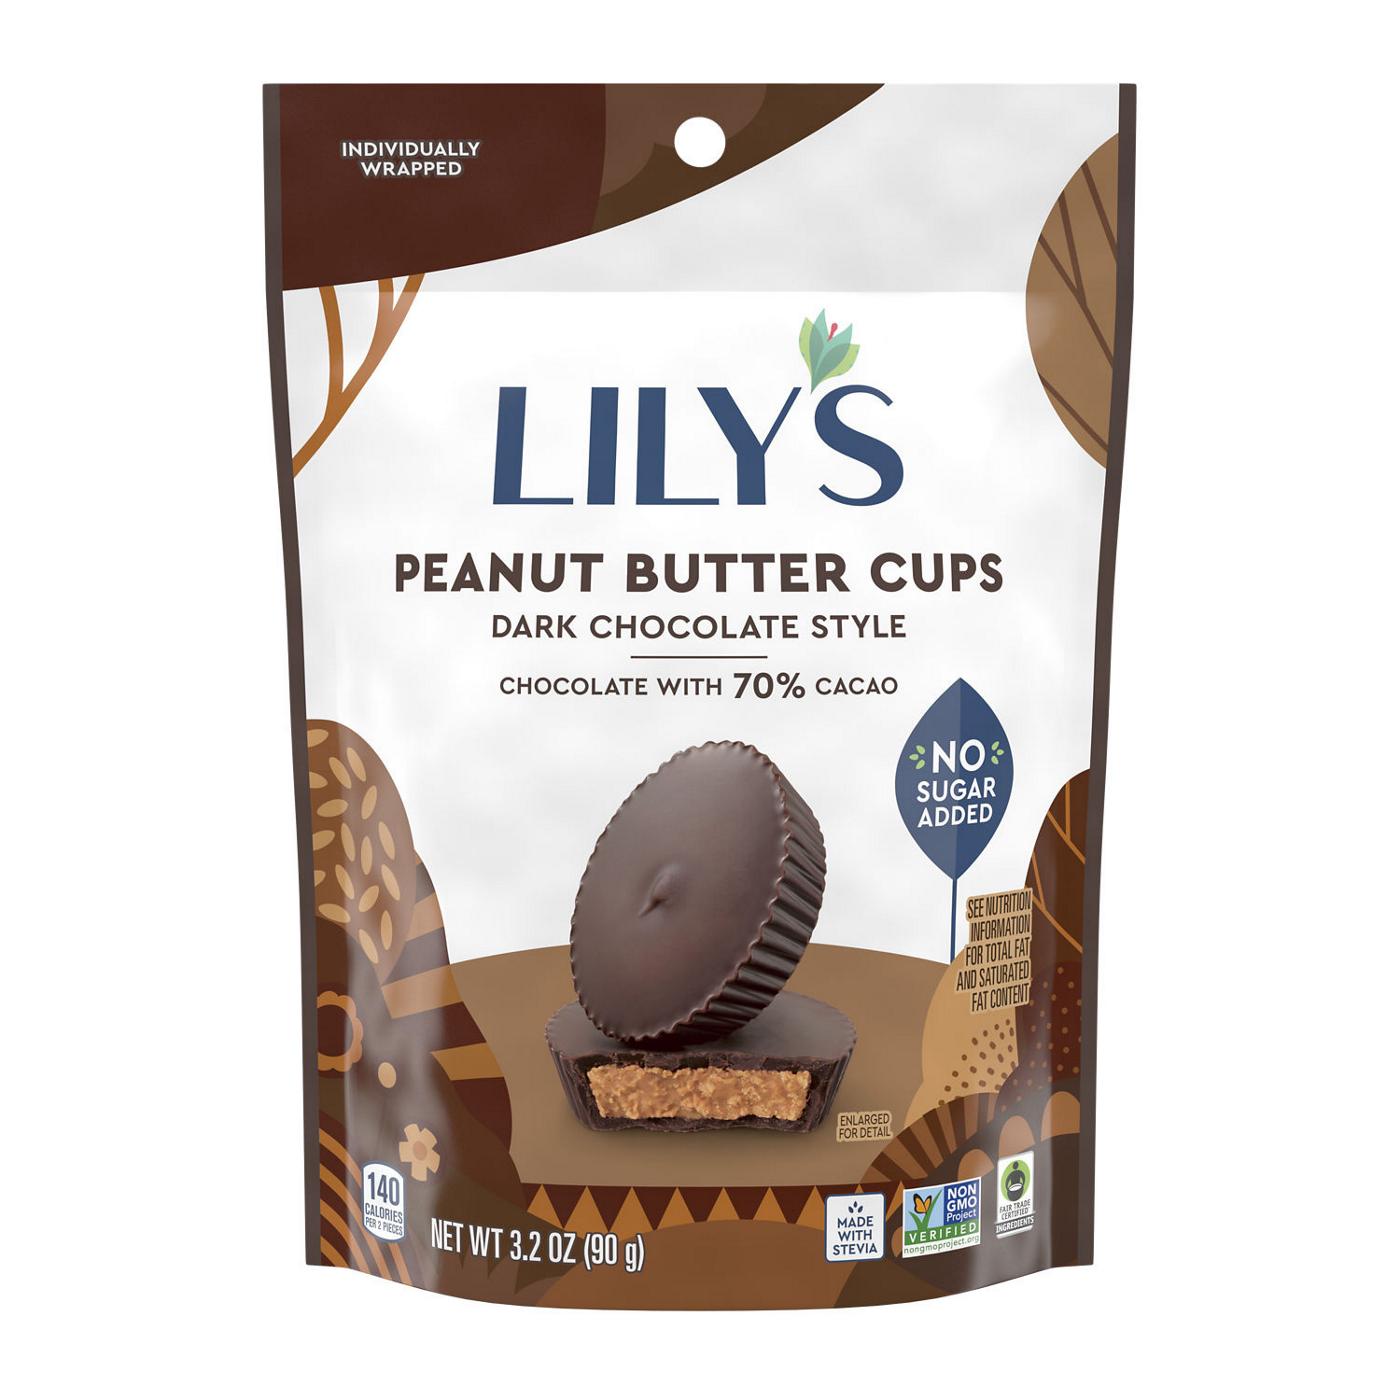 Lily's Dark Chocolate Style Peanut Butter Cups; image 1 of 6